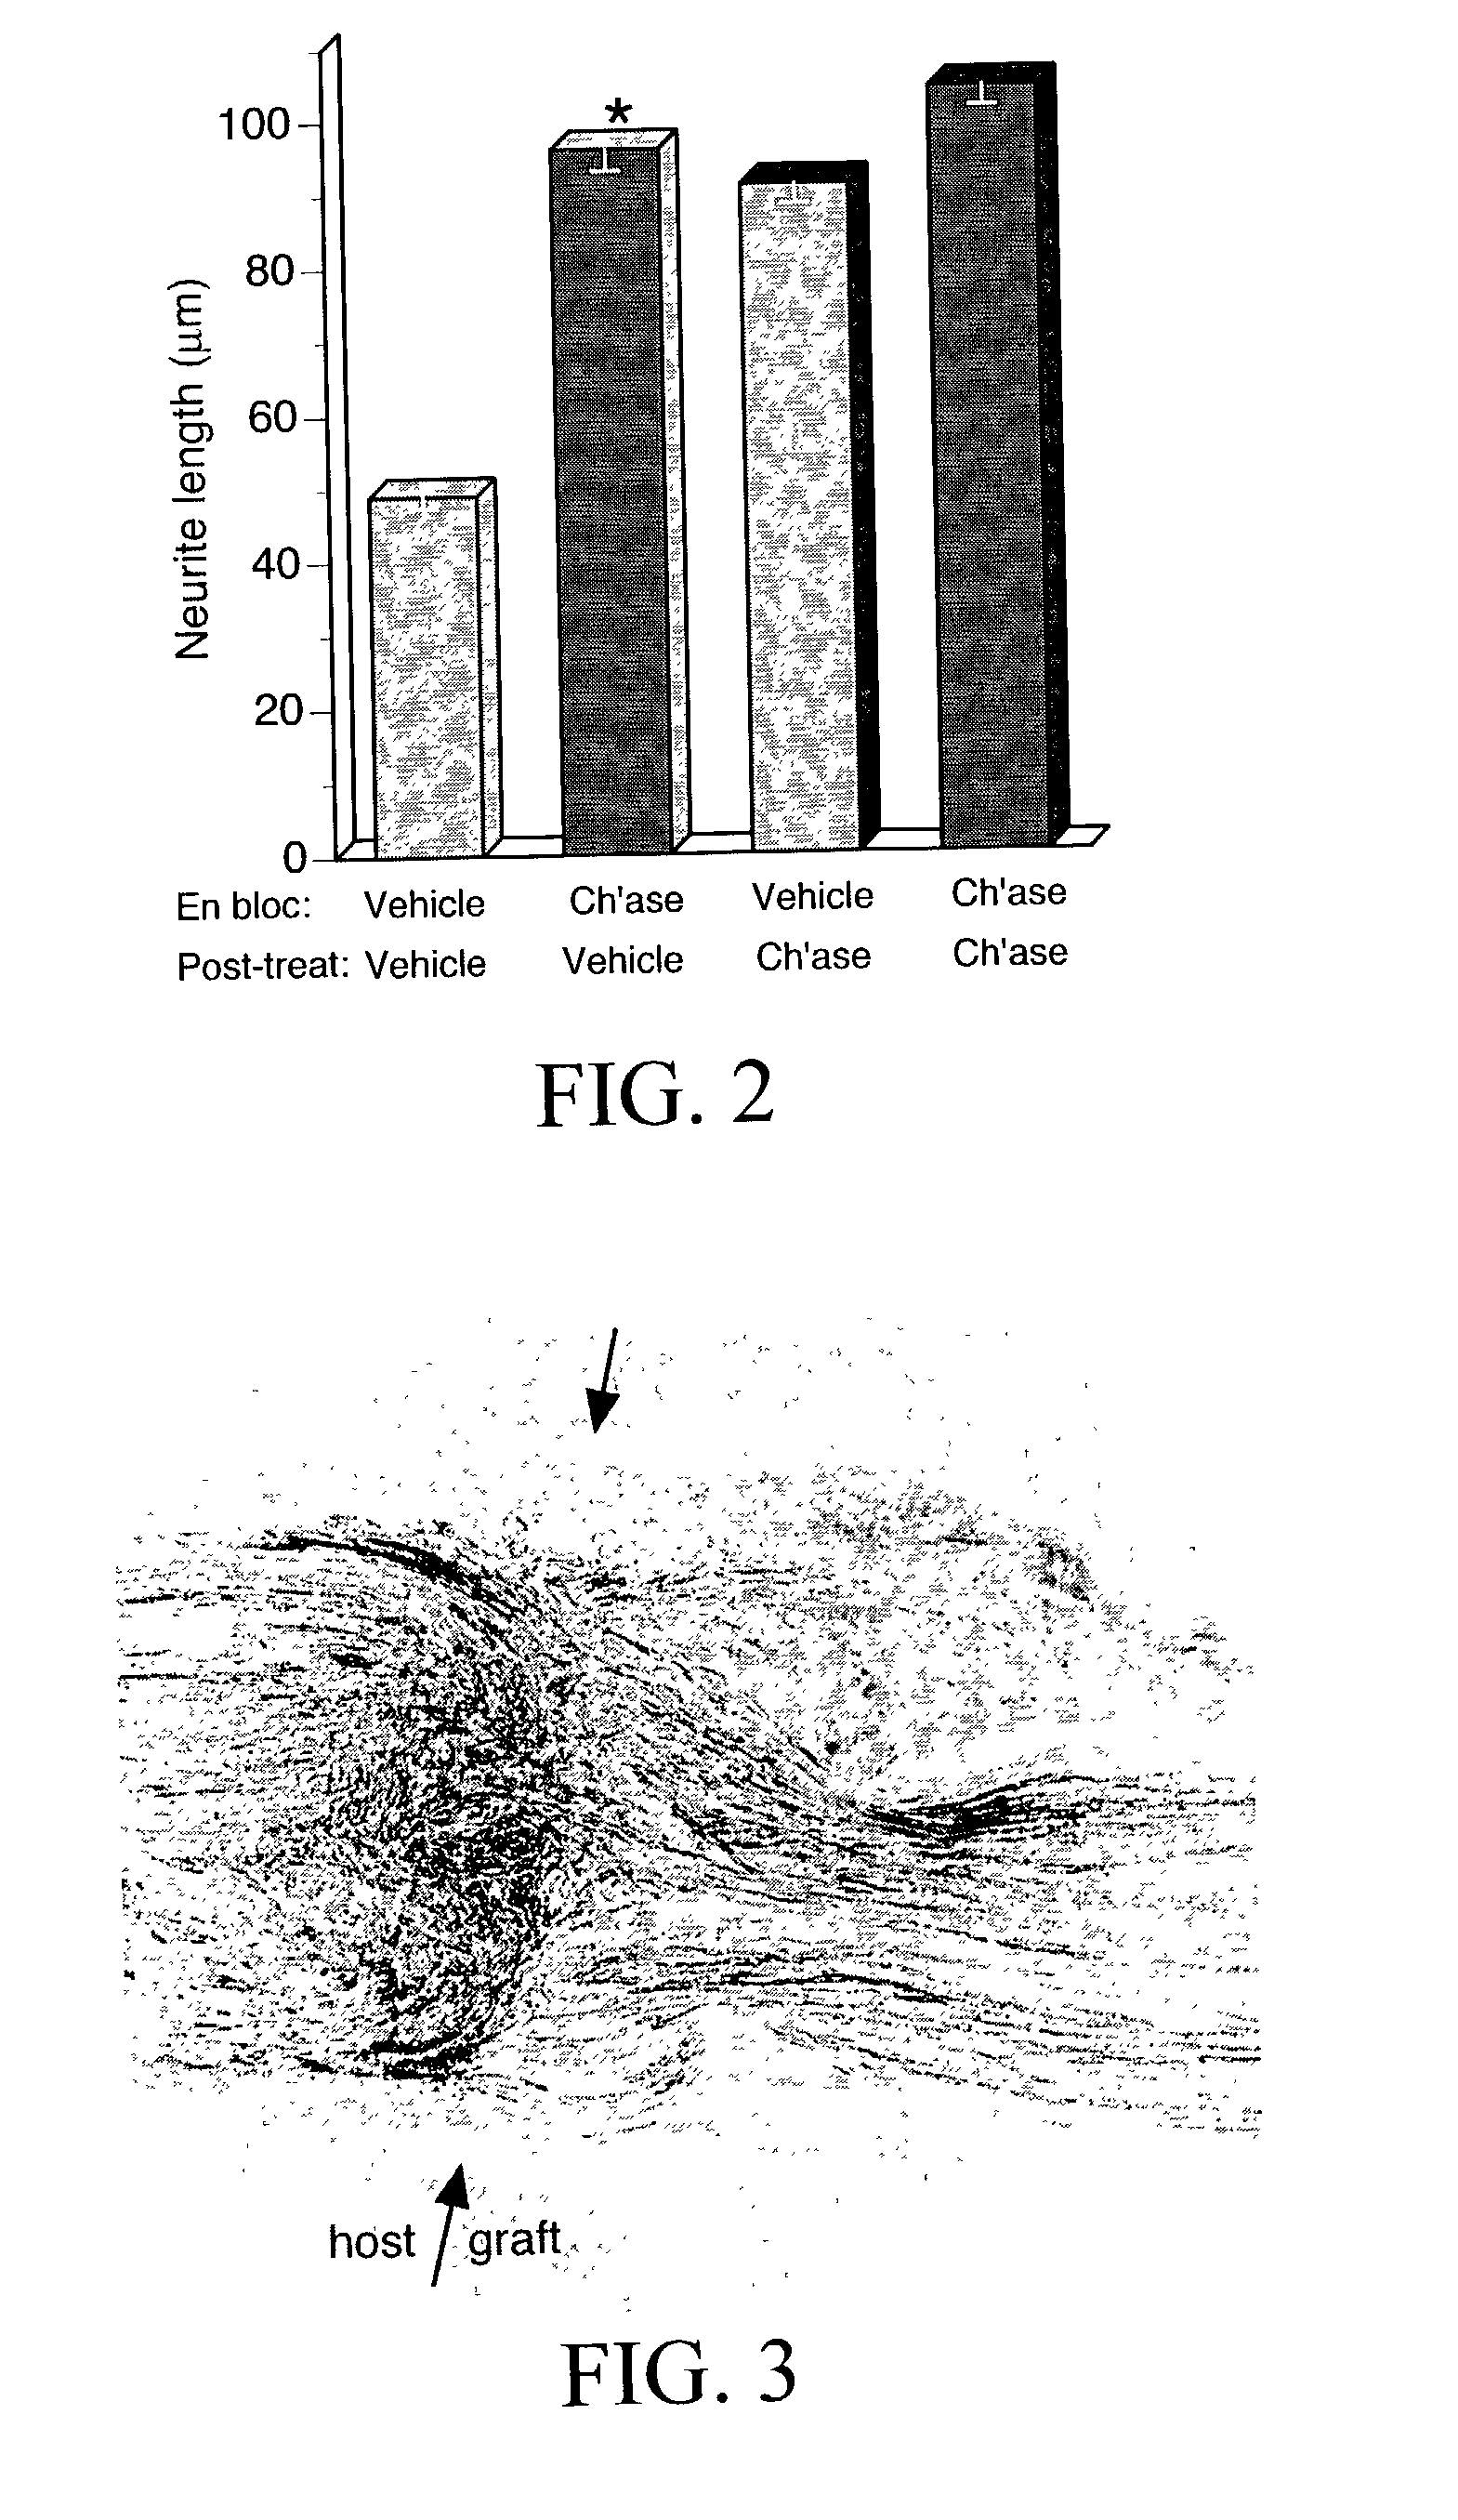 Materials and methods for nerve grafting, selection of nerve grafts, and in vitro nerve tissue culture